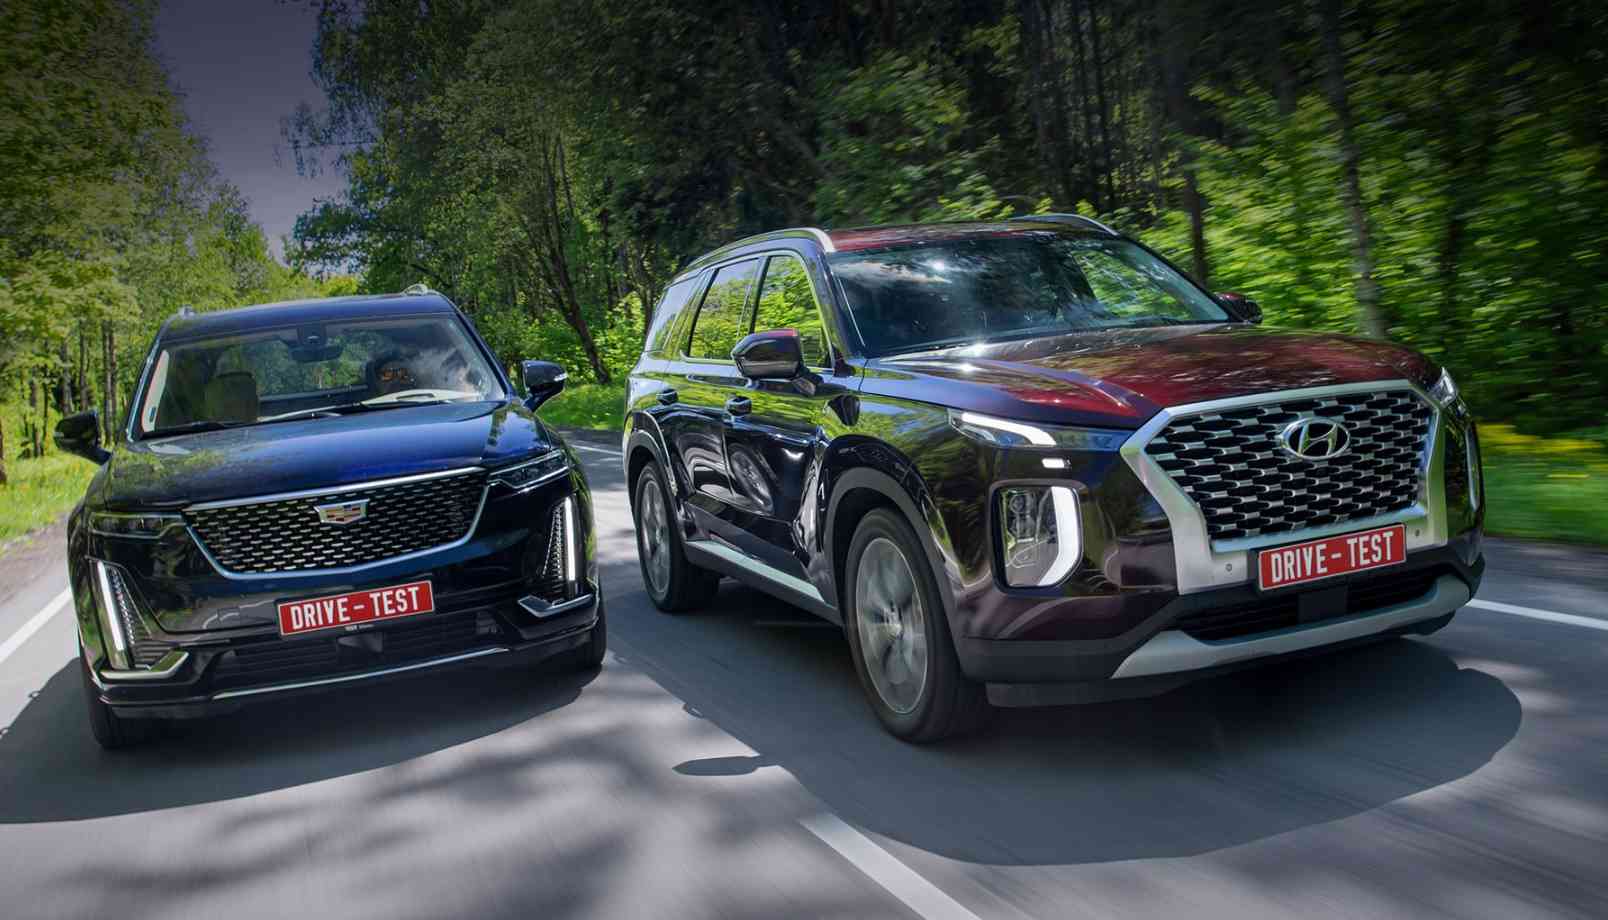 We evaluate the Hyundai Palisade from the level of the Cadillac XT6 crossover